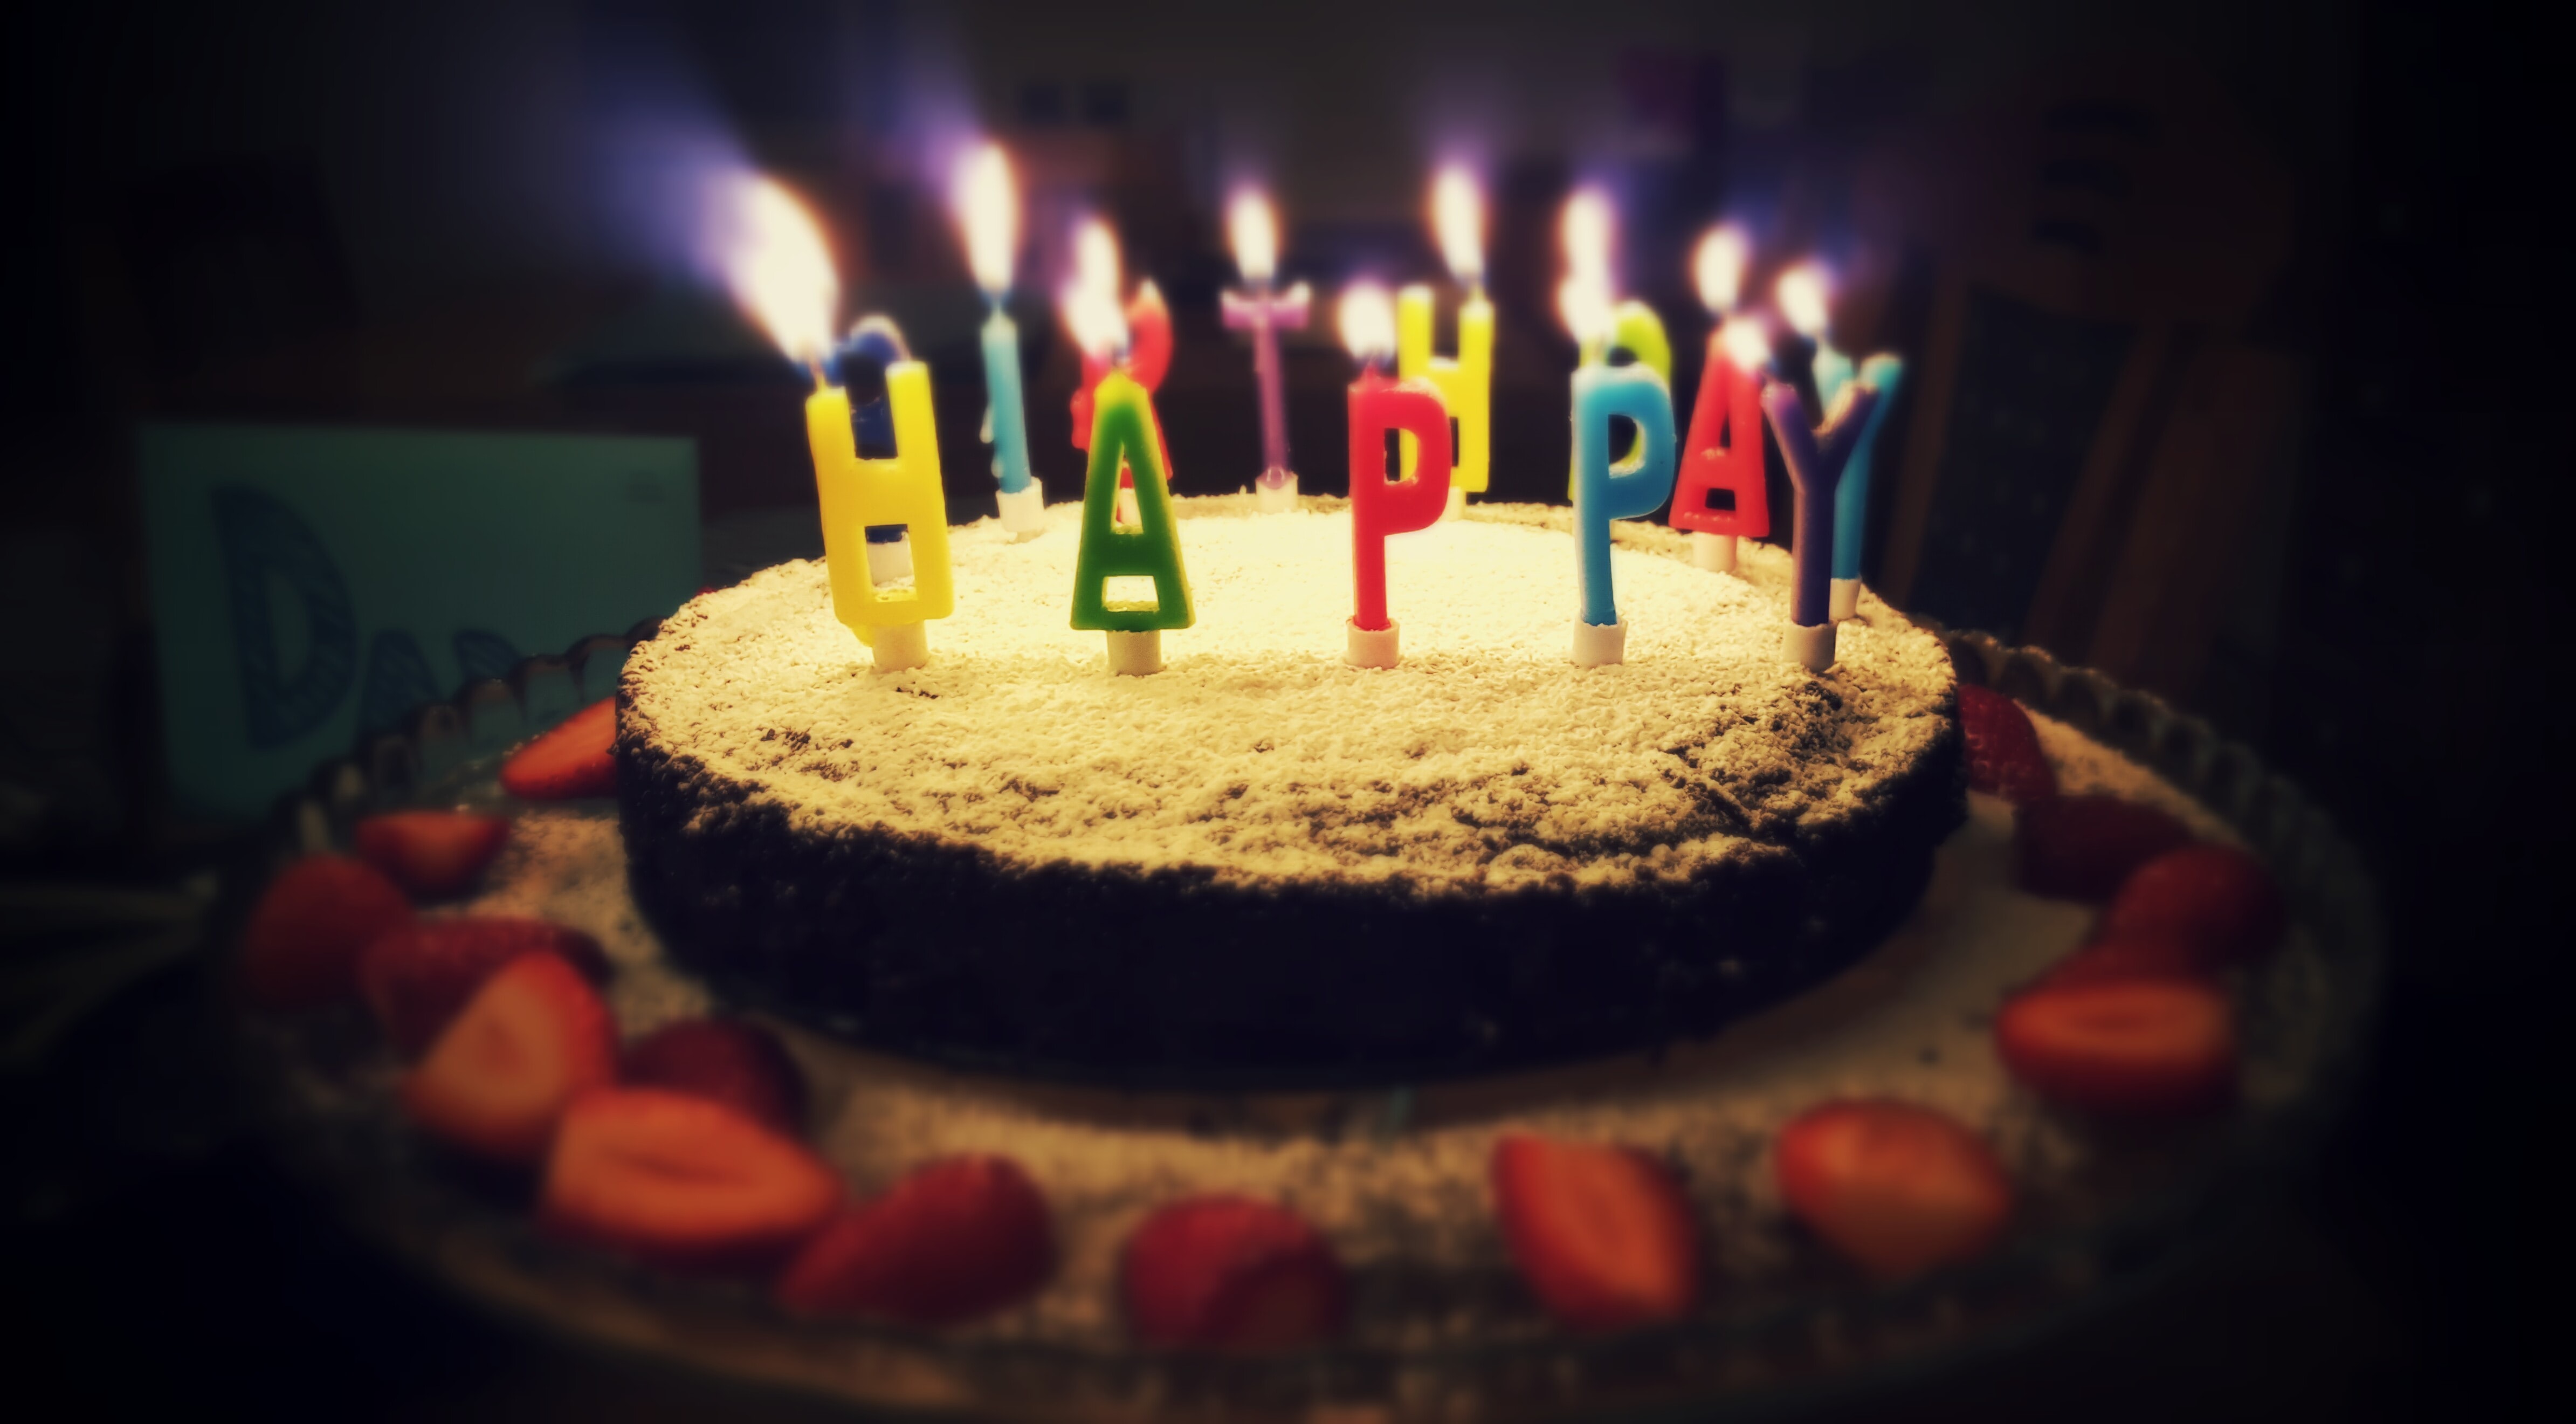 round cake with candles and "happy birthday" sign